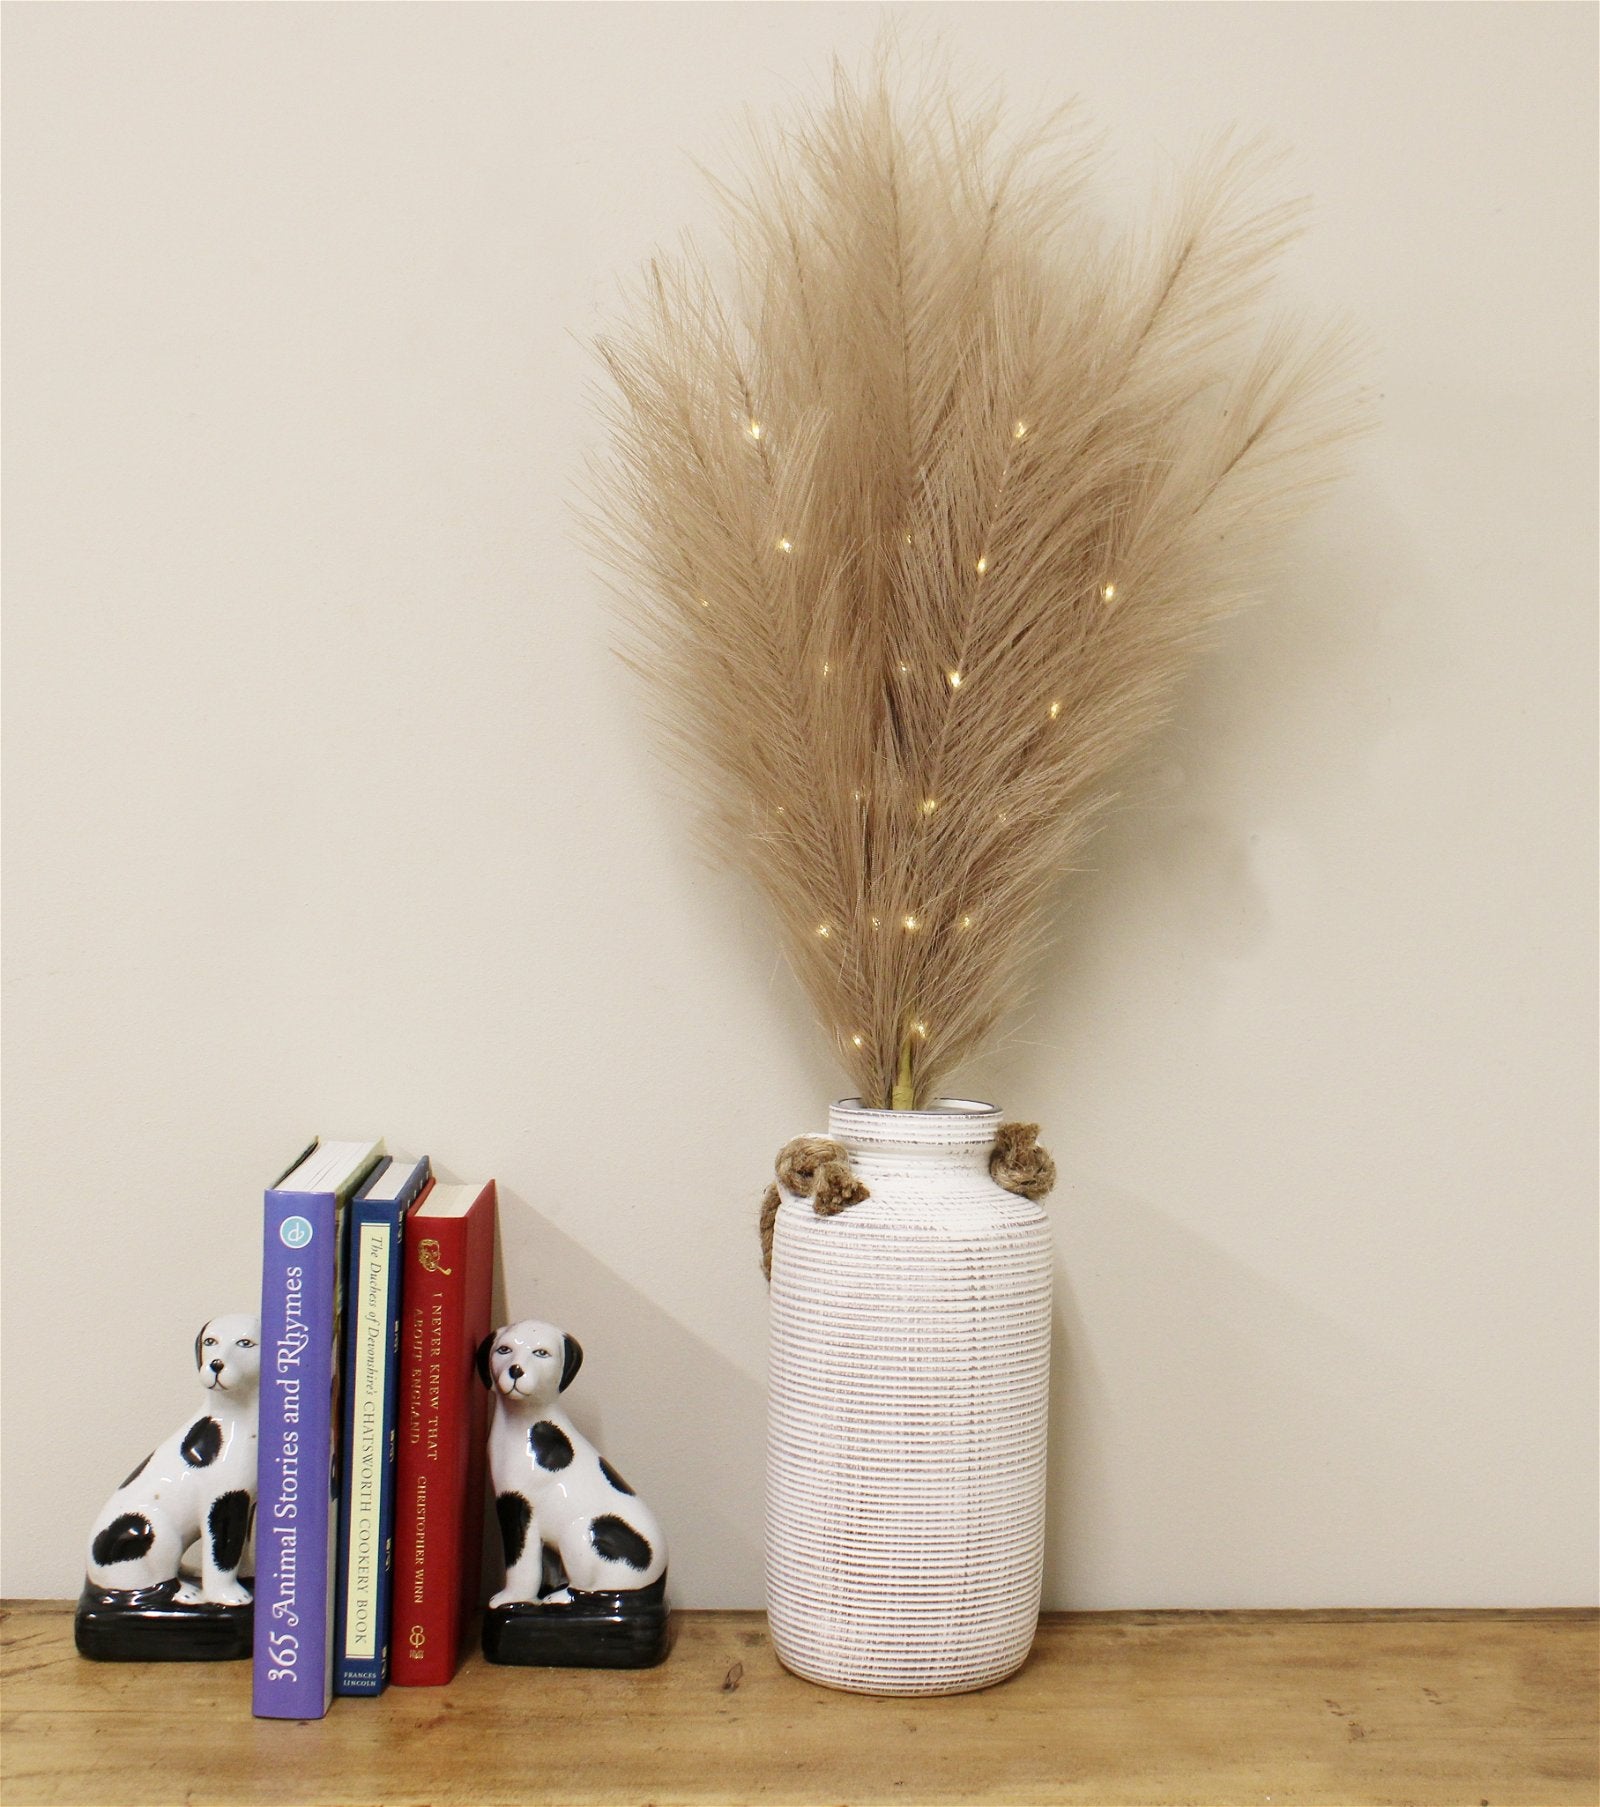 View Set of Five Brown Led Pampas Grass Stems information